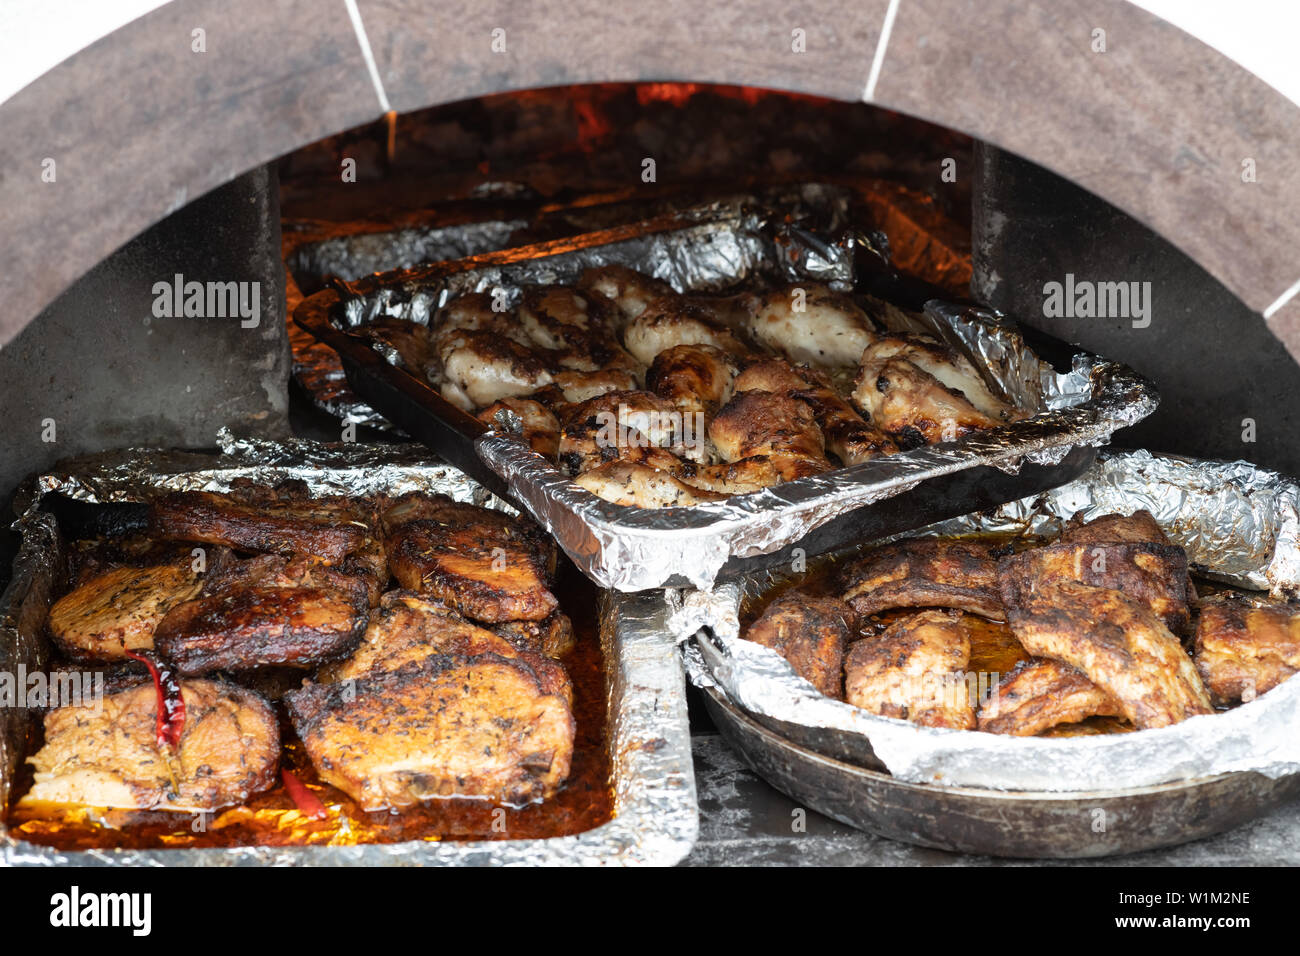 description: description: trays of cooked meat in the oven on the coals. Stock Photo